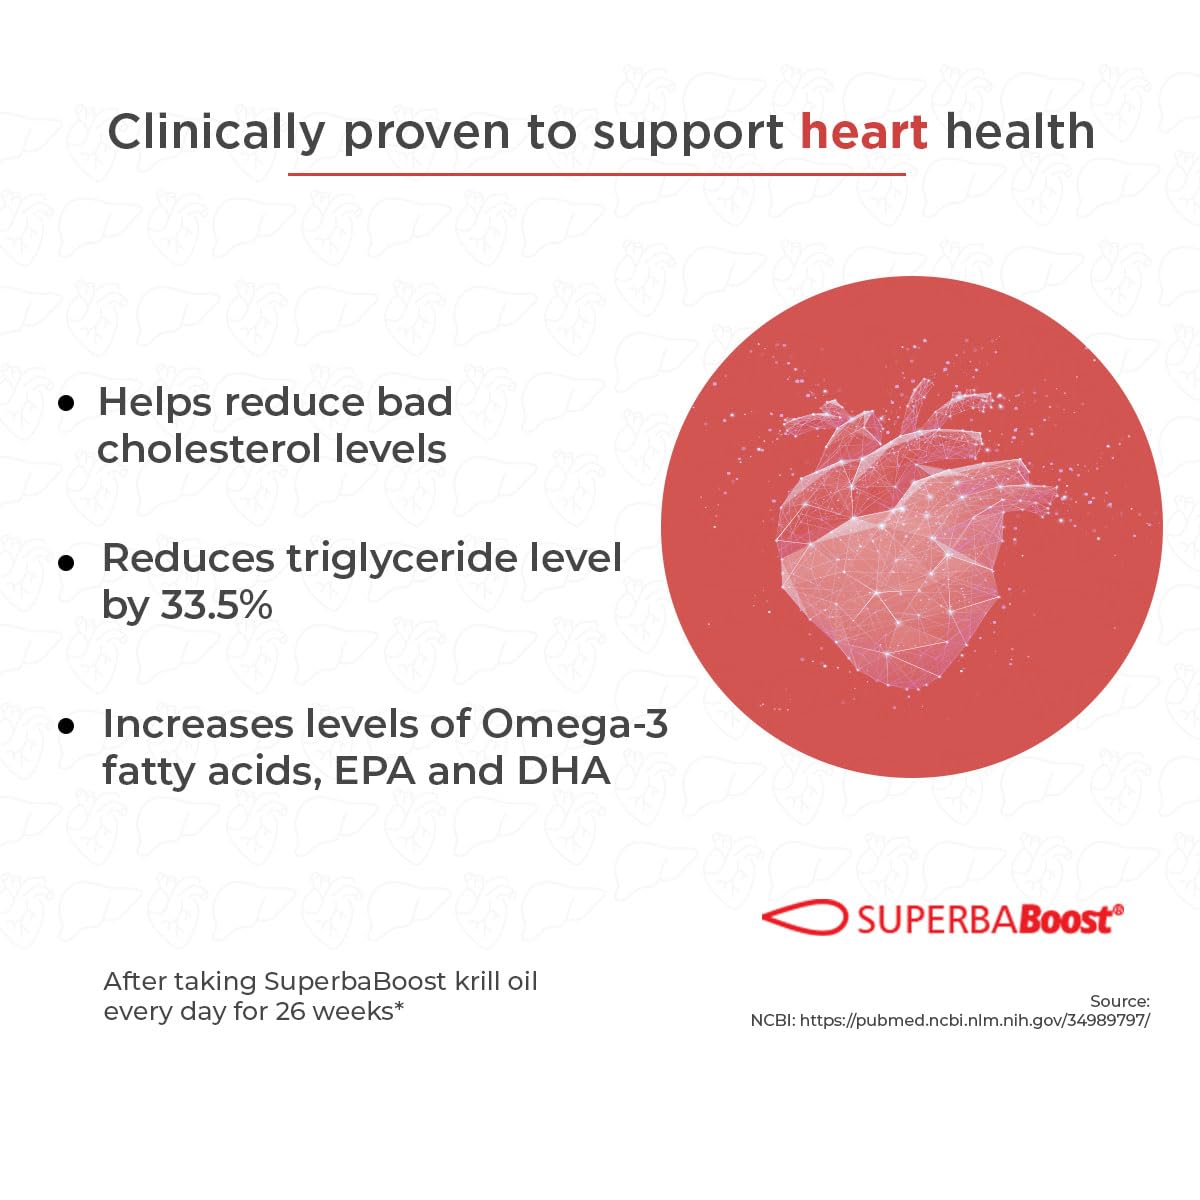 SuperbaBoost clinically proven to support heart health